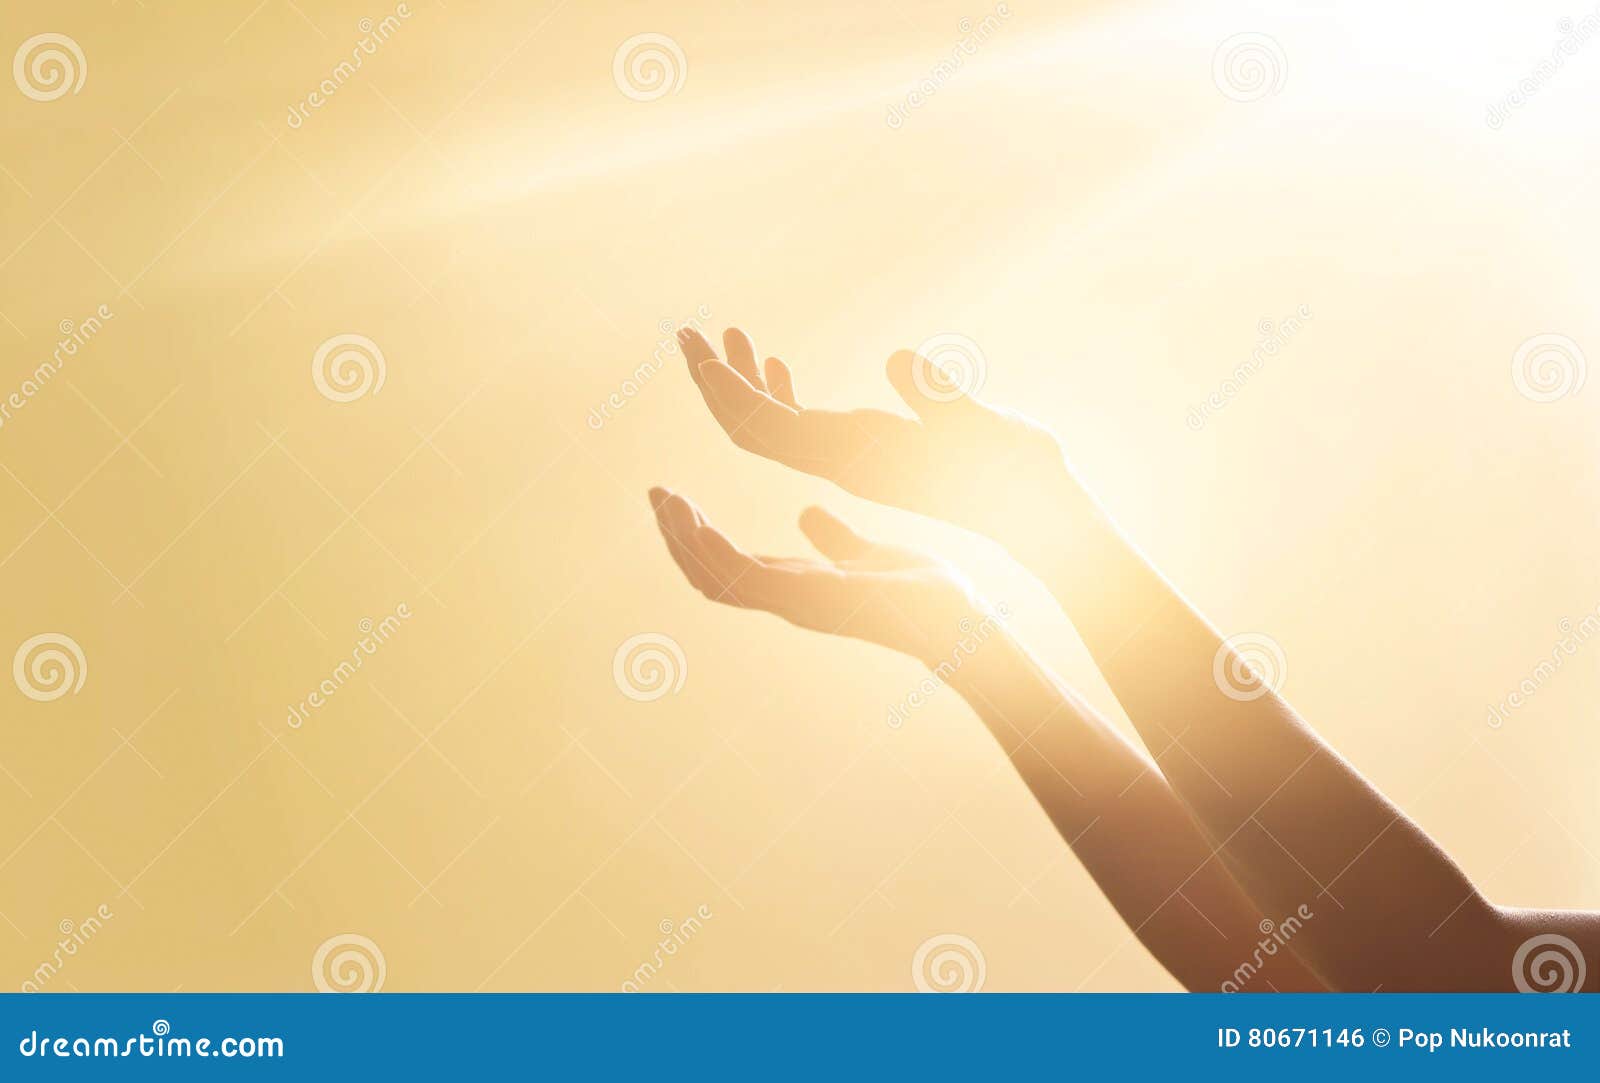 Woman hands praying for blessing from god on sunset background. Woman hands praying for blessing from god on sunlight and sunset background